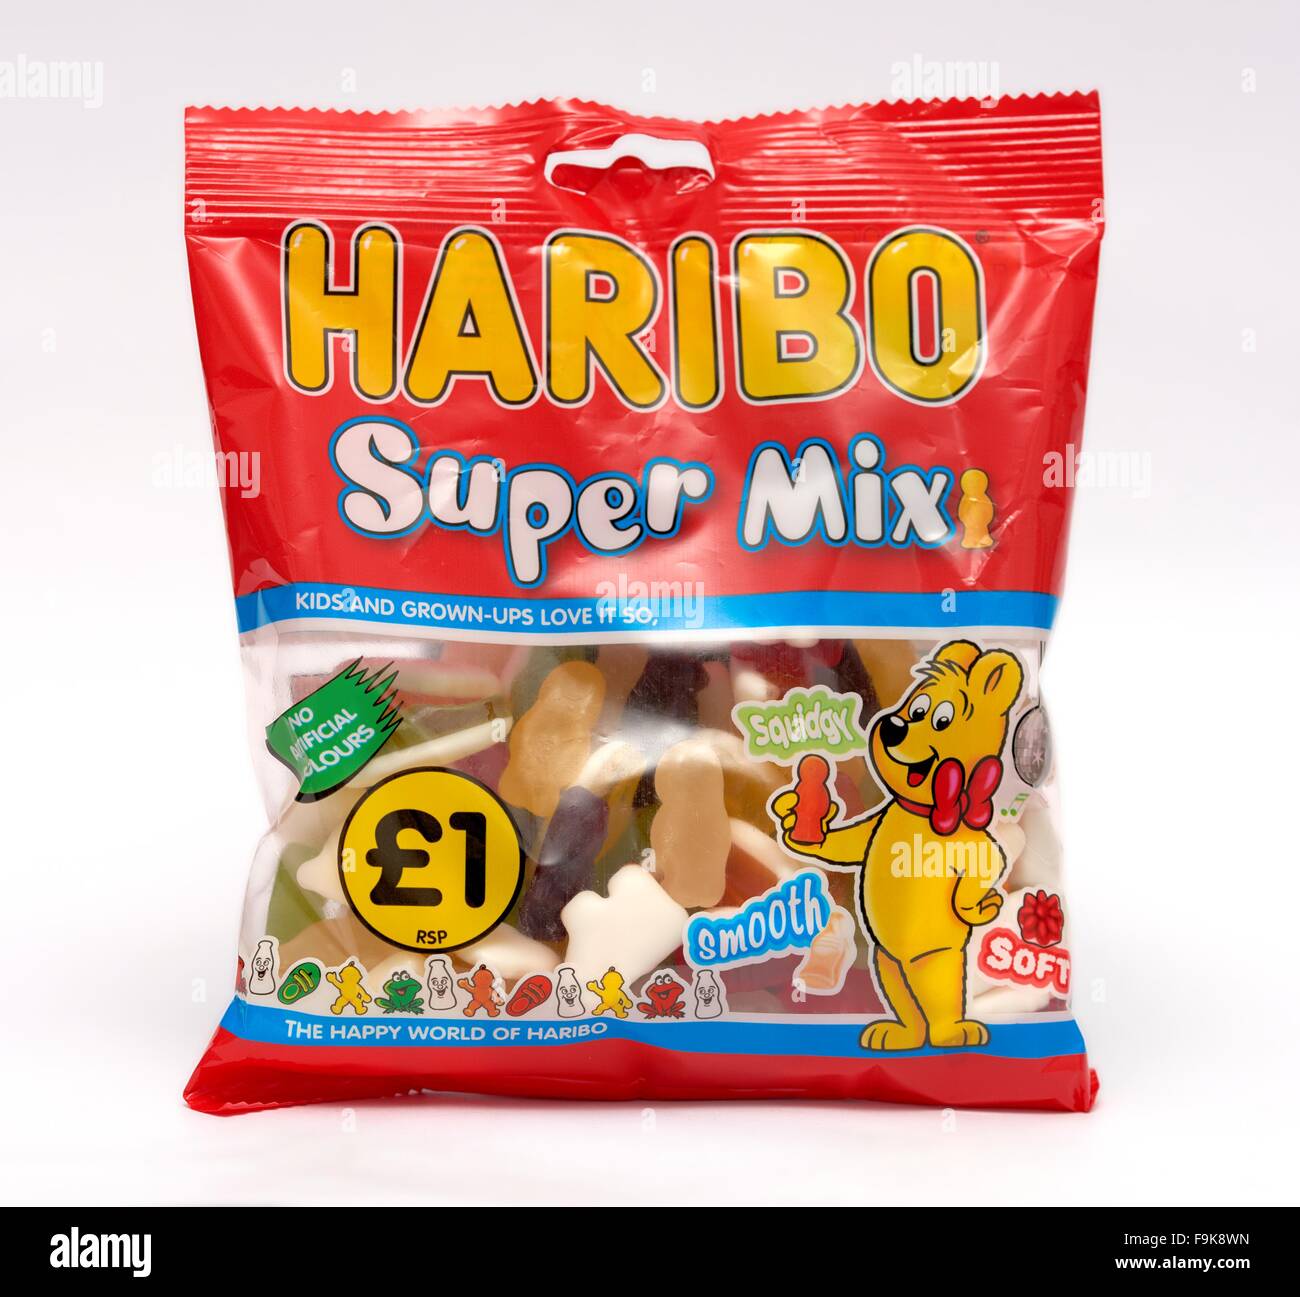 Haribo super mix jellied sweets priced at £1 Stock Photo